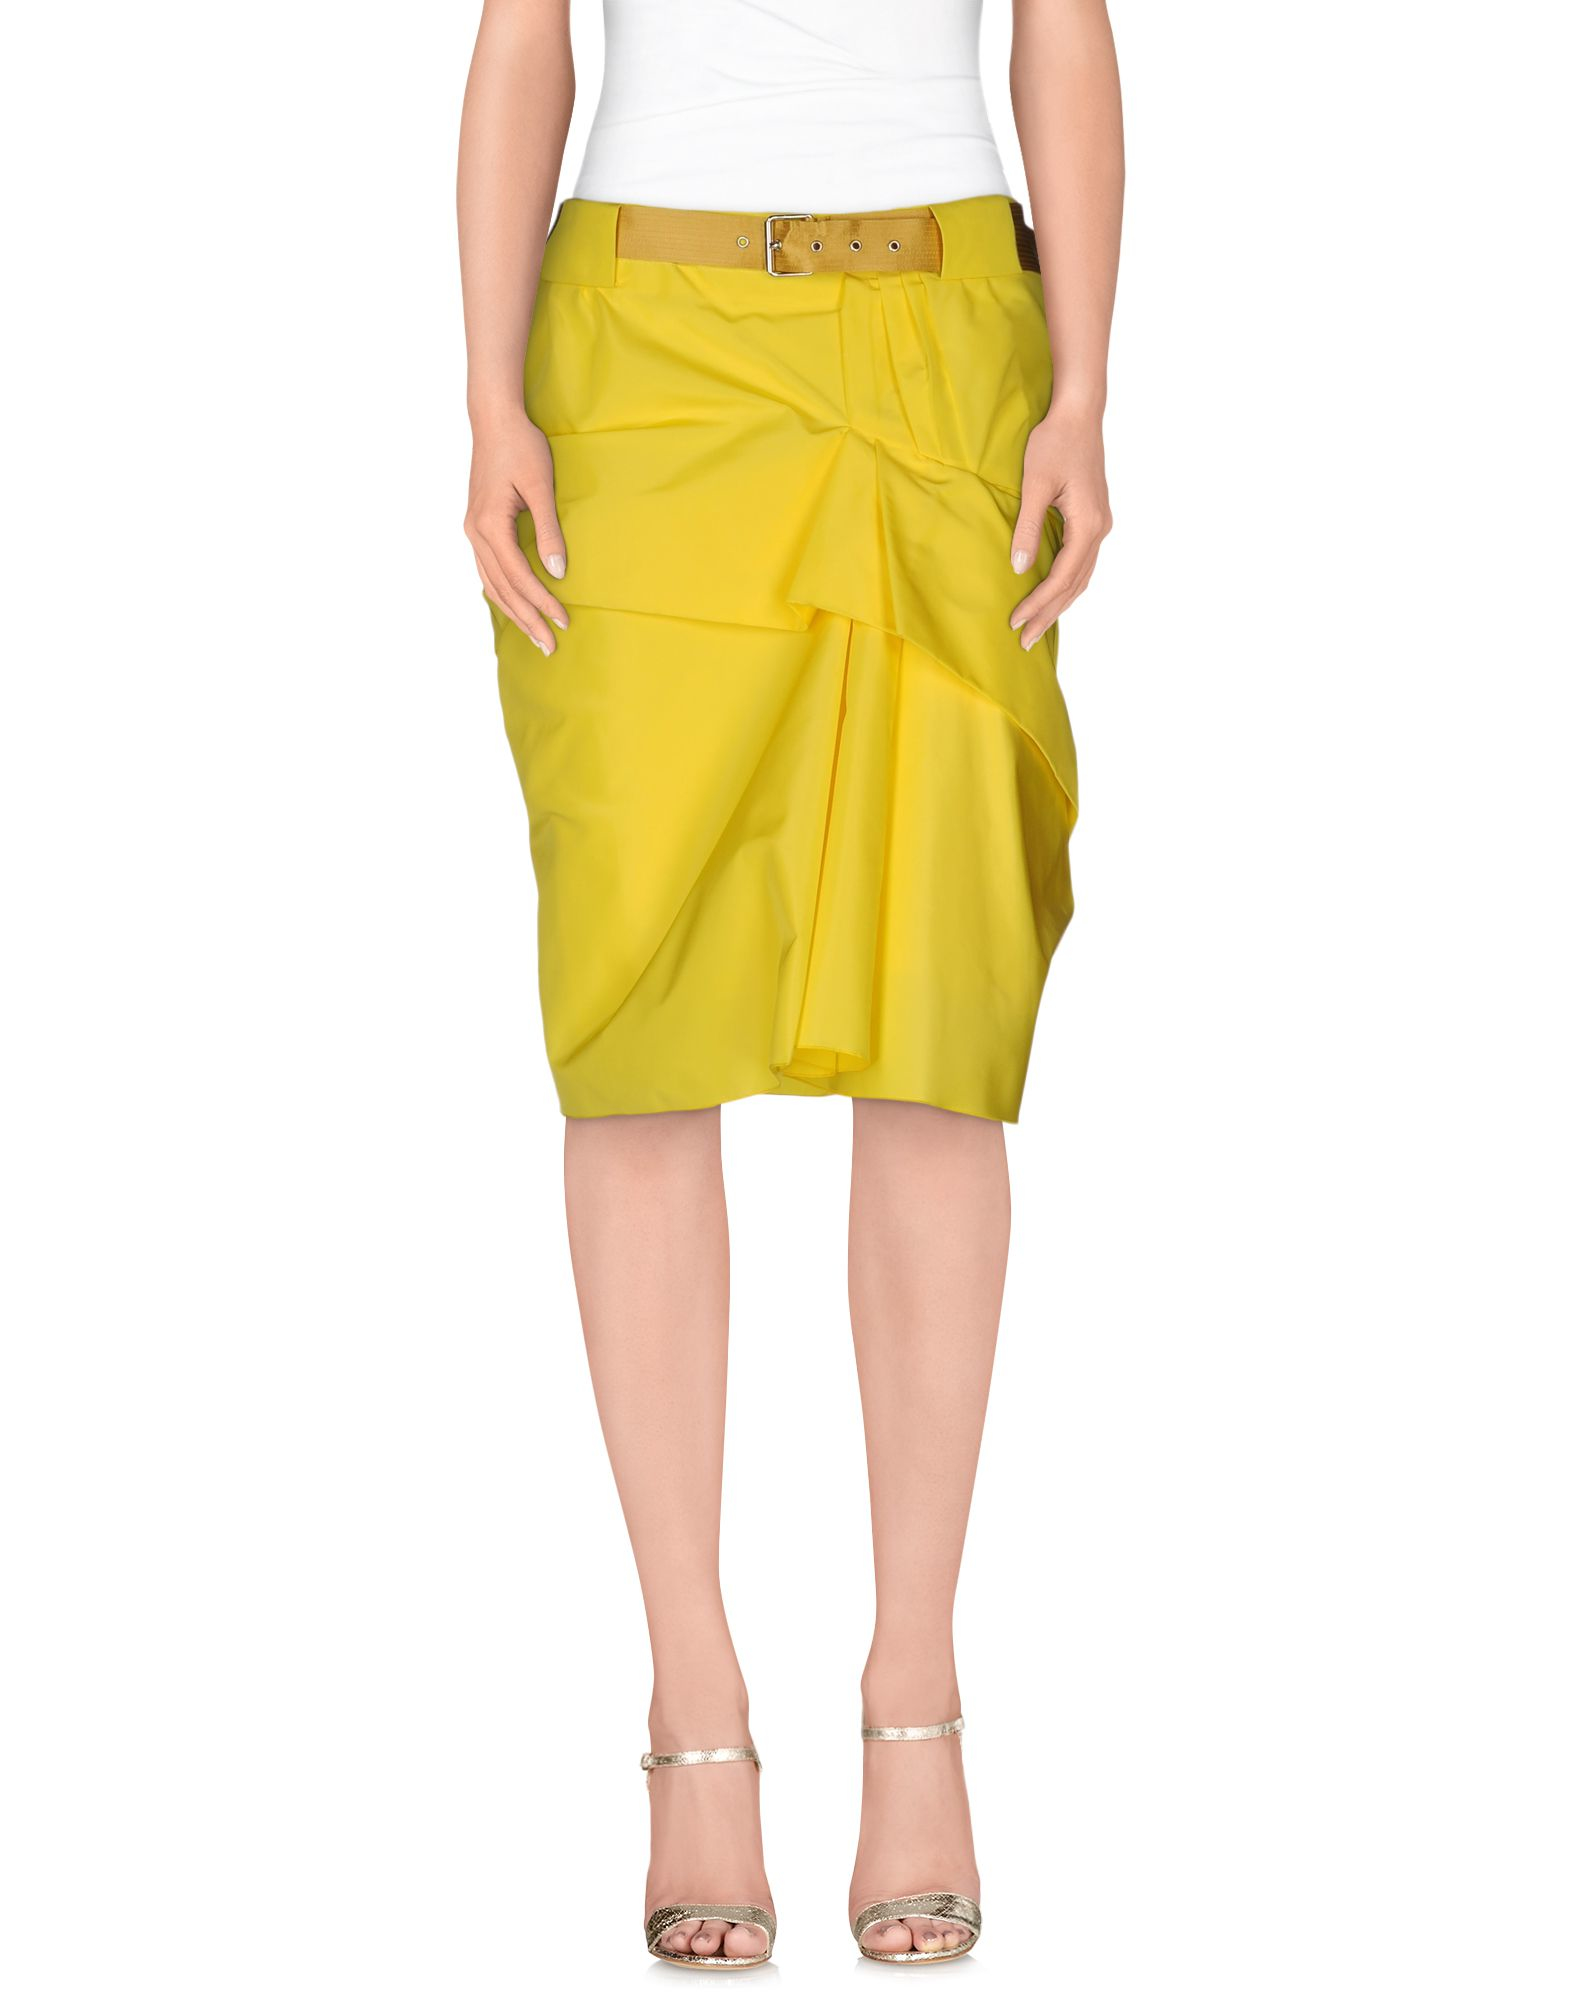 Marc Jacobs Silk Knee Length Skirt in Yellow - Lyst